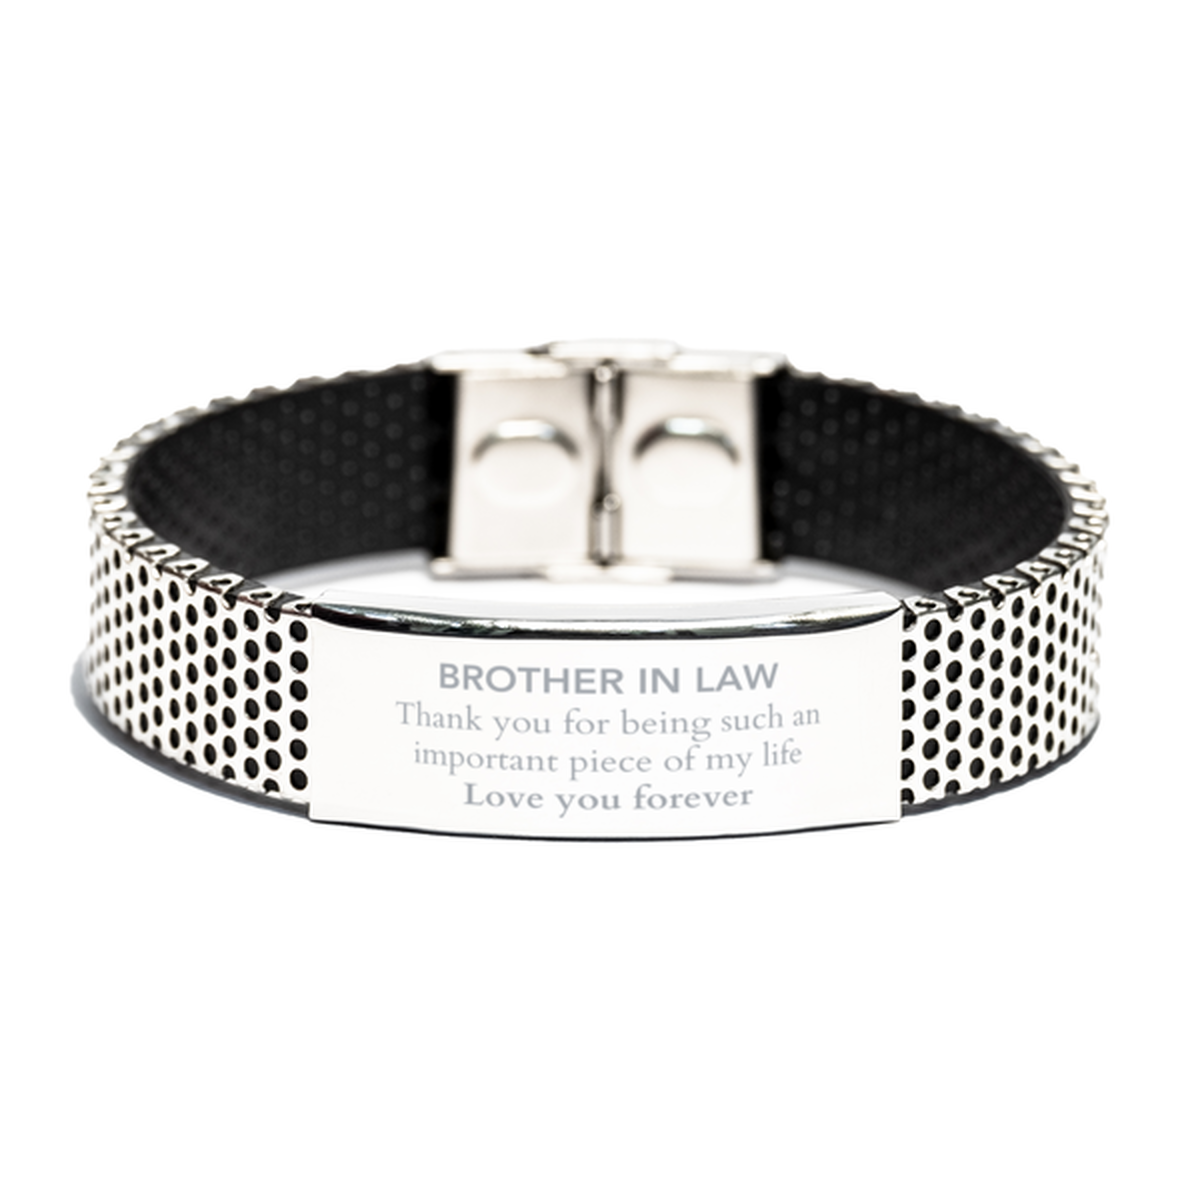 Appropriate Brother In Law Stainless Steel Bracelet Epic Birthday Gifts for Brother In Law Thank you for being such an important piece of my life Brother In Law Christmas Mothers Fathers Day